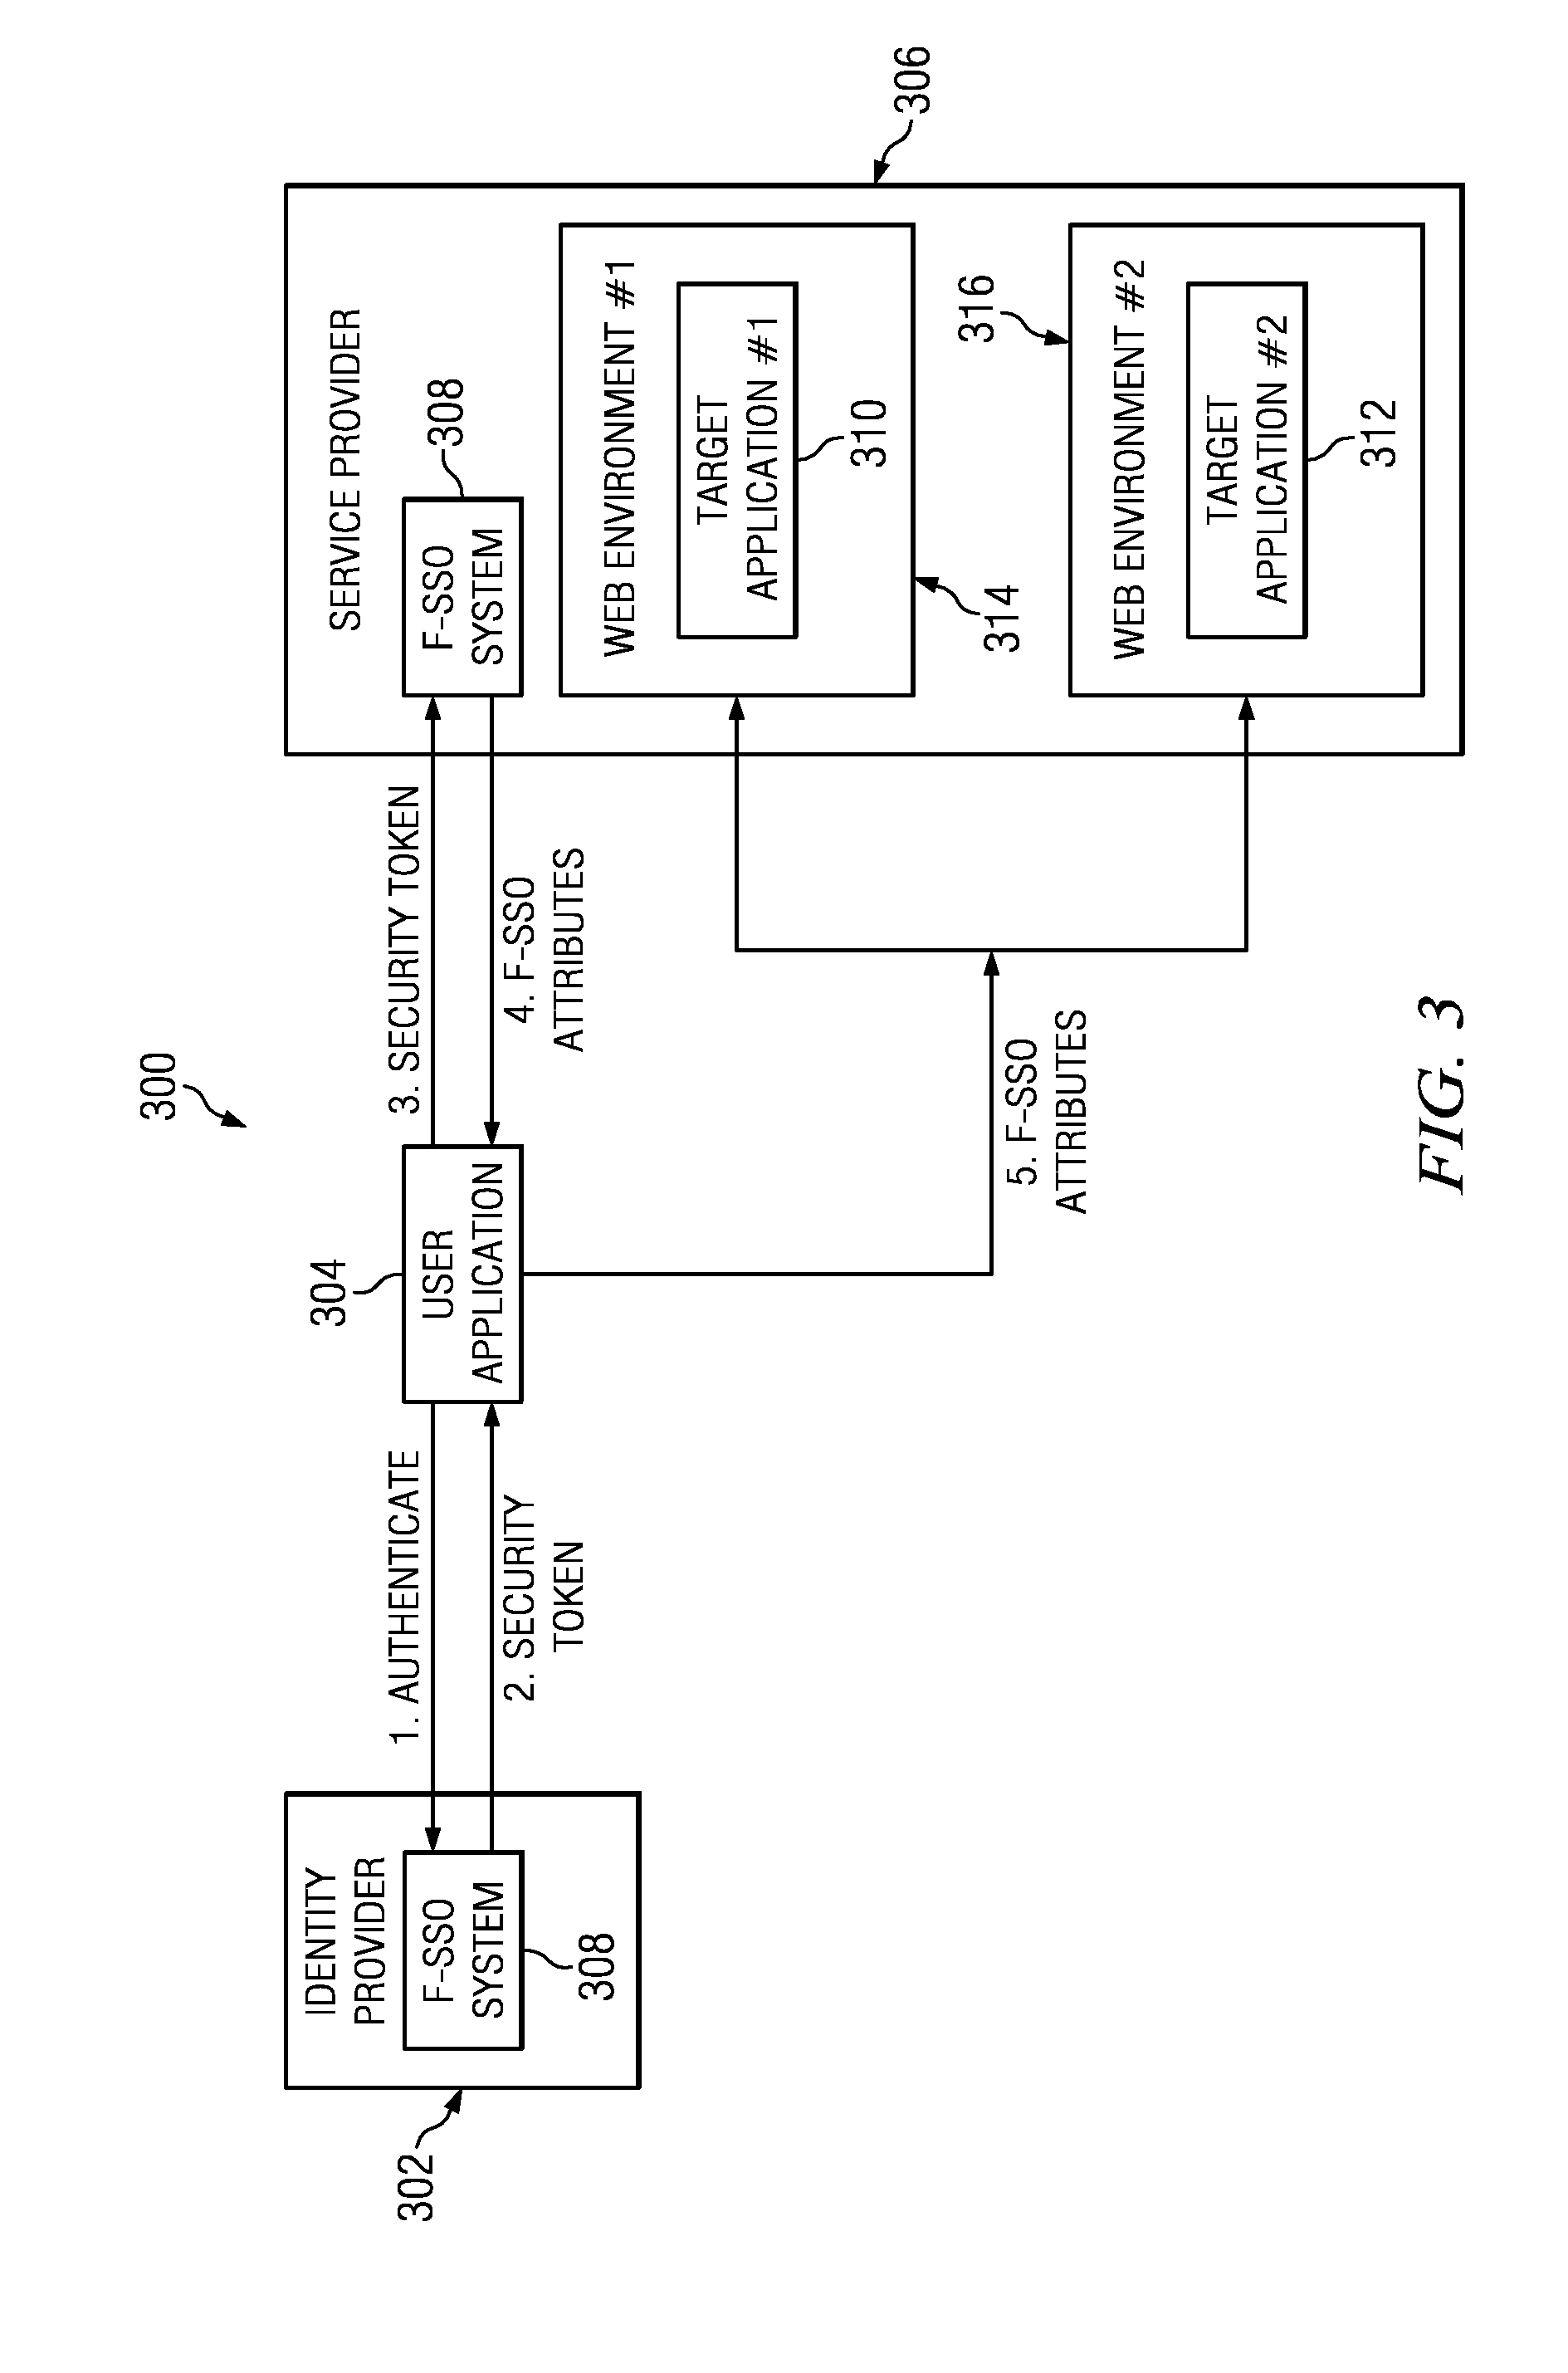 Authentication and authorization methods for cloud computing security